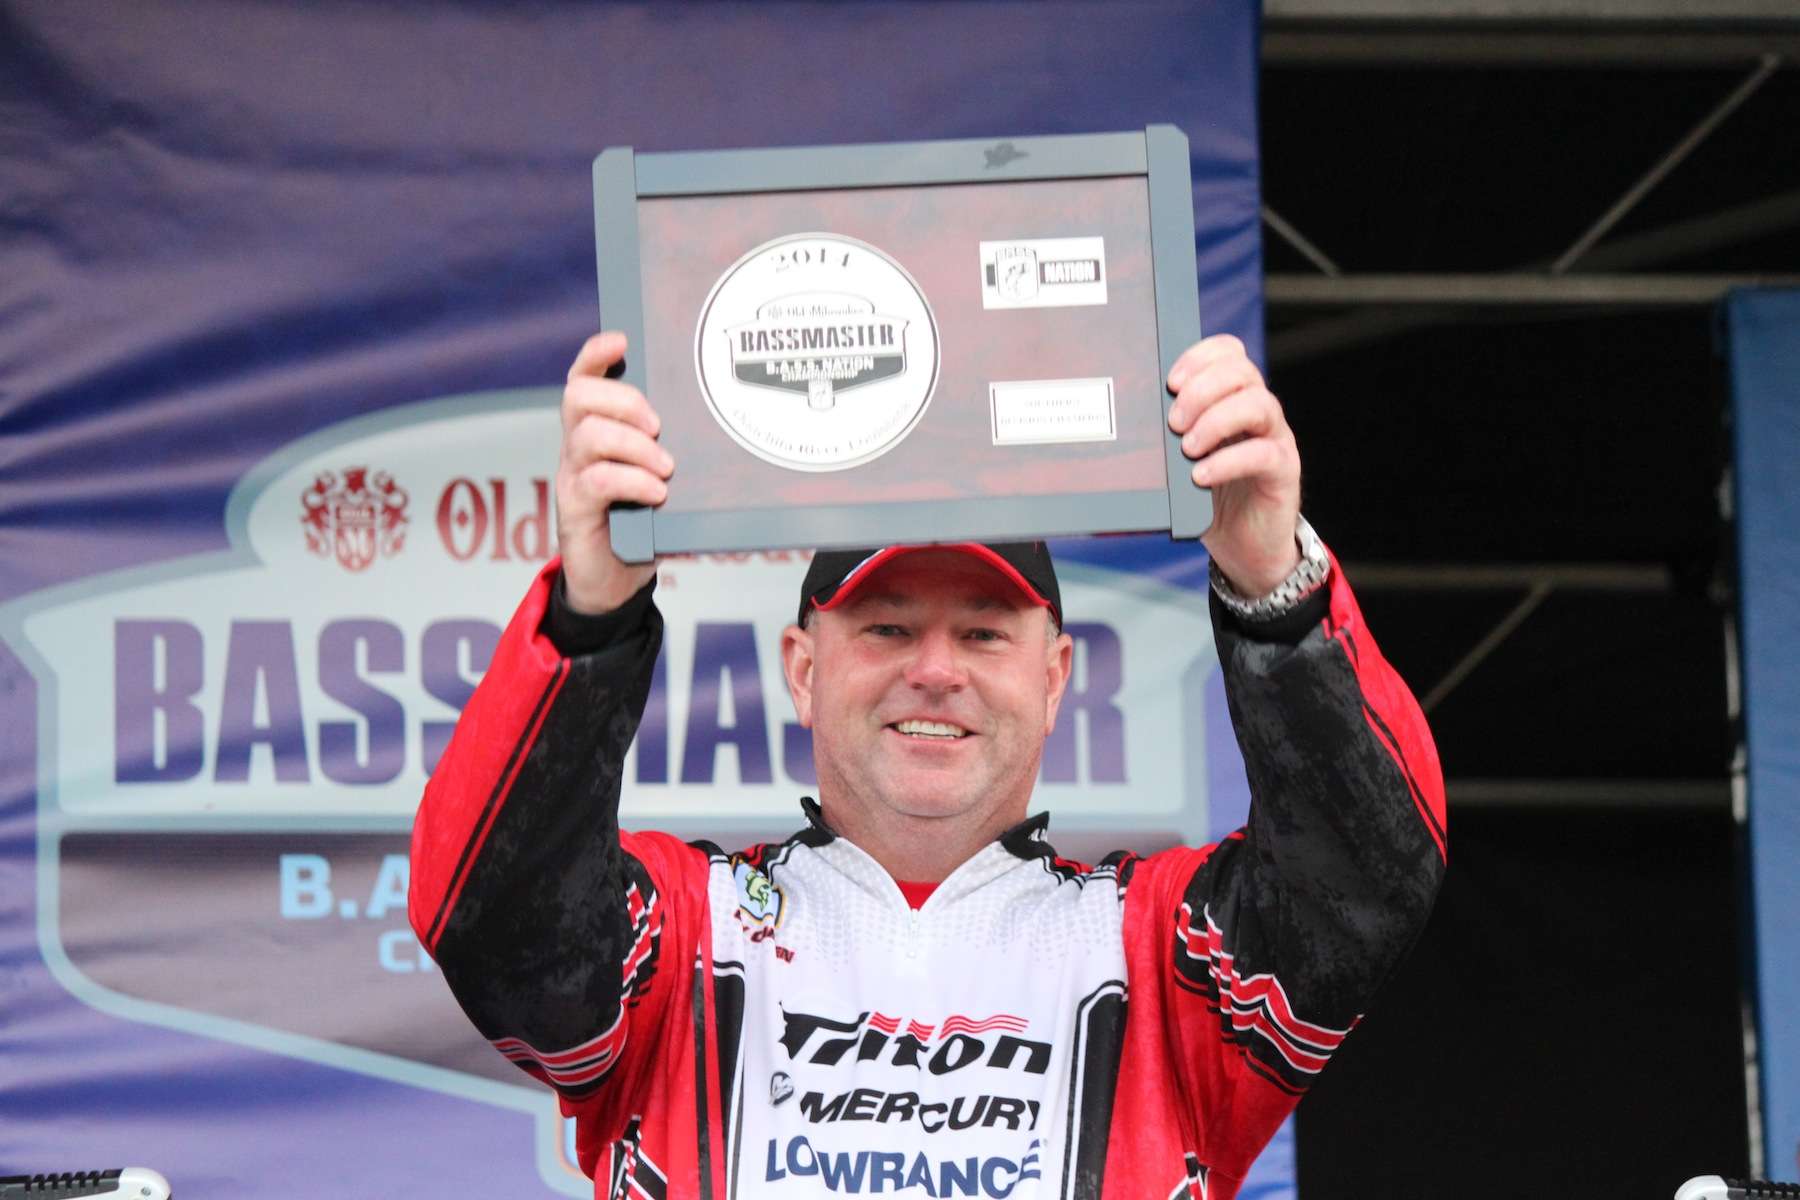 Coby Carden will move on to represent the Southern Division in the 2015 Bassmaster Classic. 